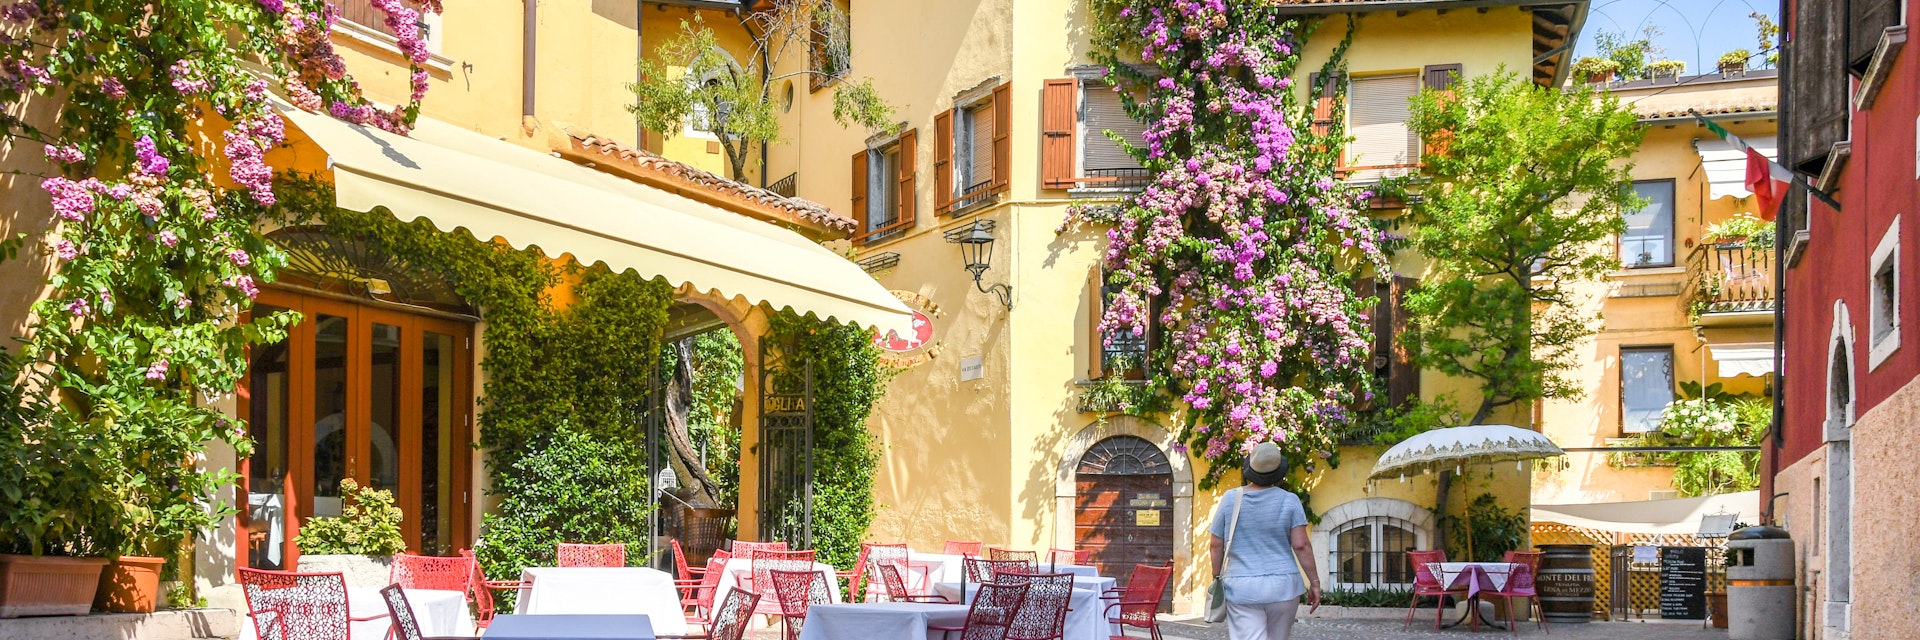 Gardone Riviera, Lake Garda, Italy - September 2018: Person walking past a restaurant with outside tables in Gardone Riviera. The buildings are covered by large flowering climbing plants.